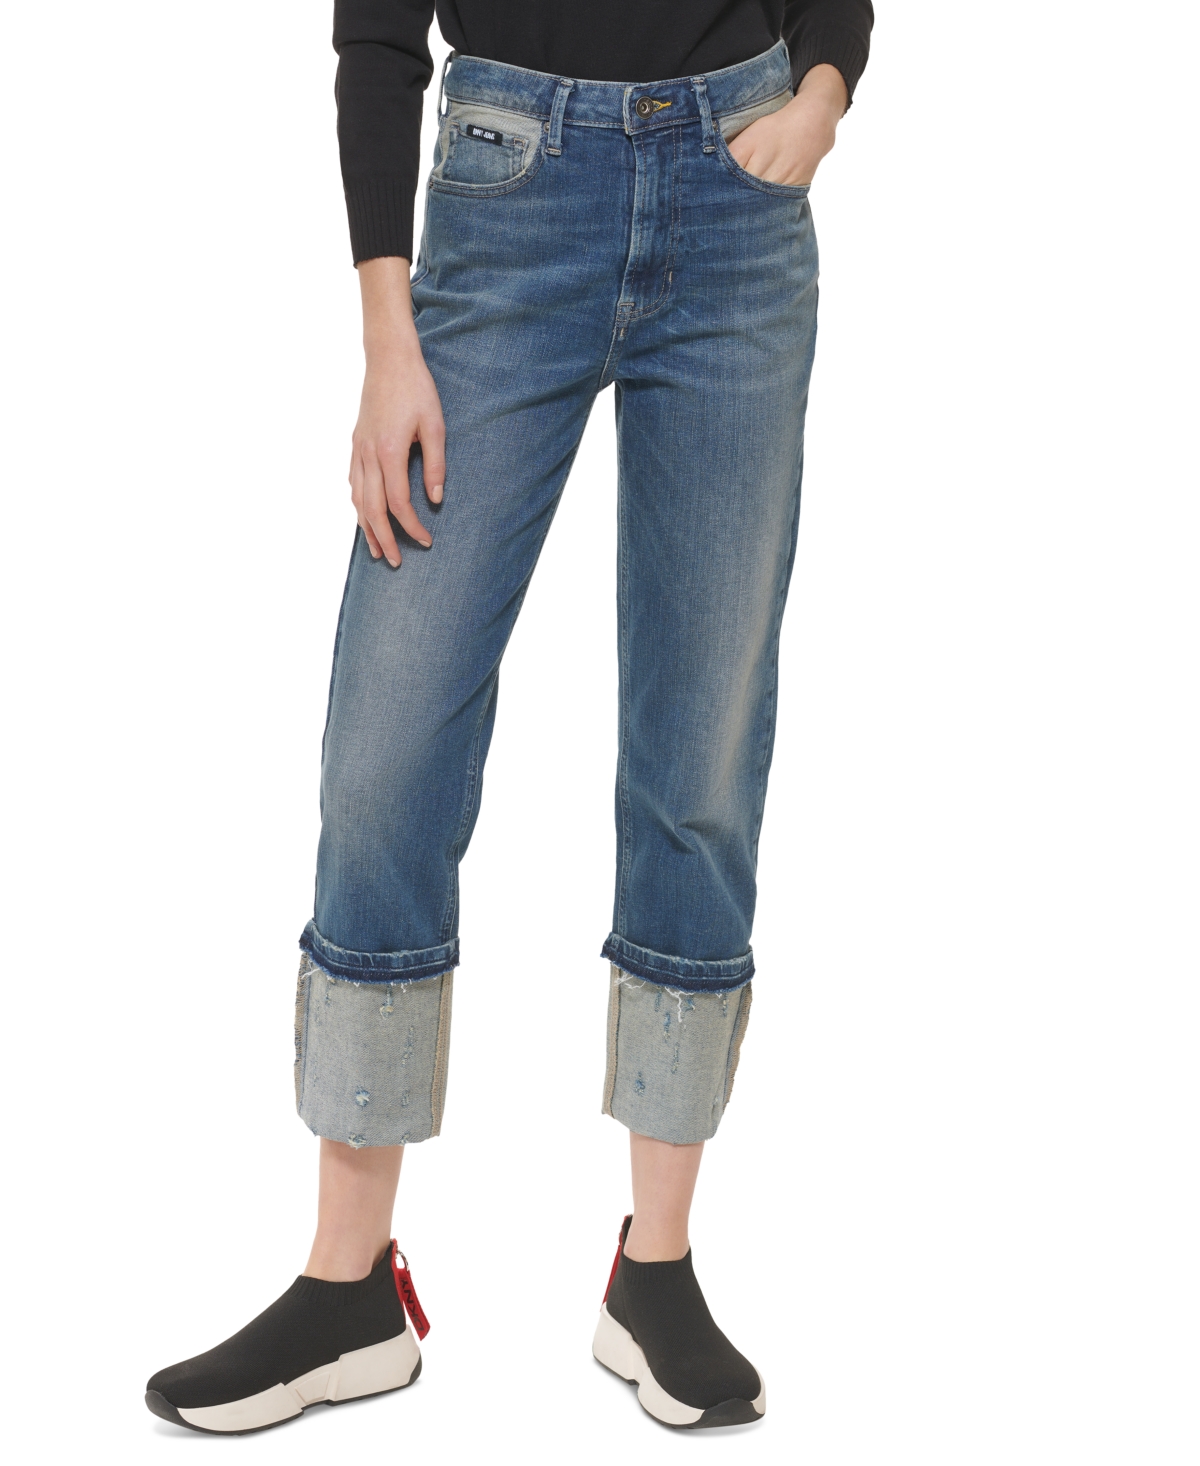  Dkny Jeans Women's Waverly High-Rise Cuffed Jeans